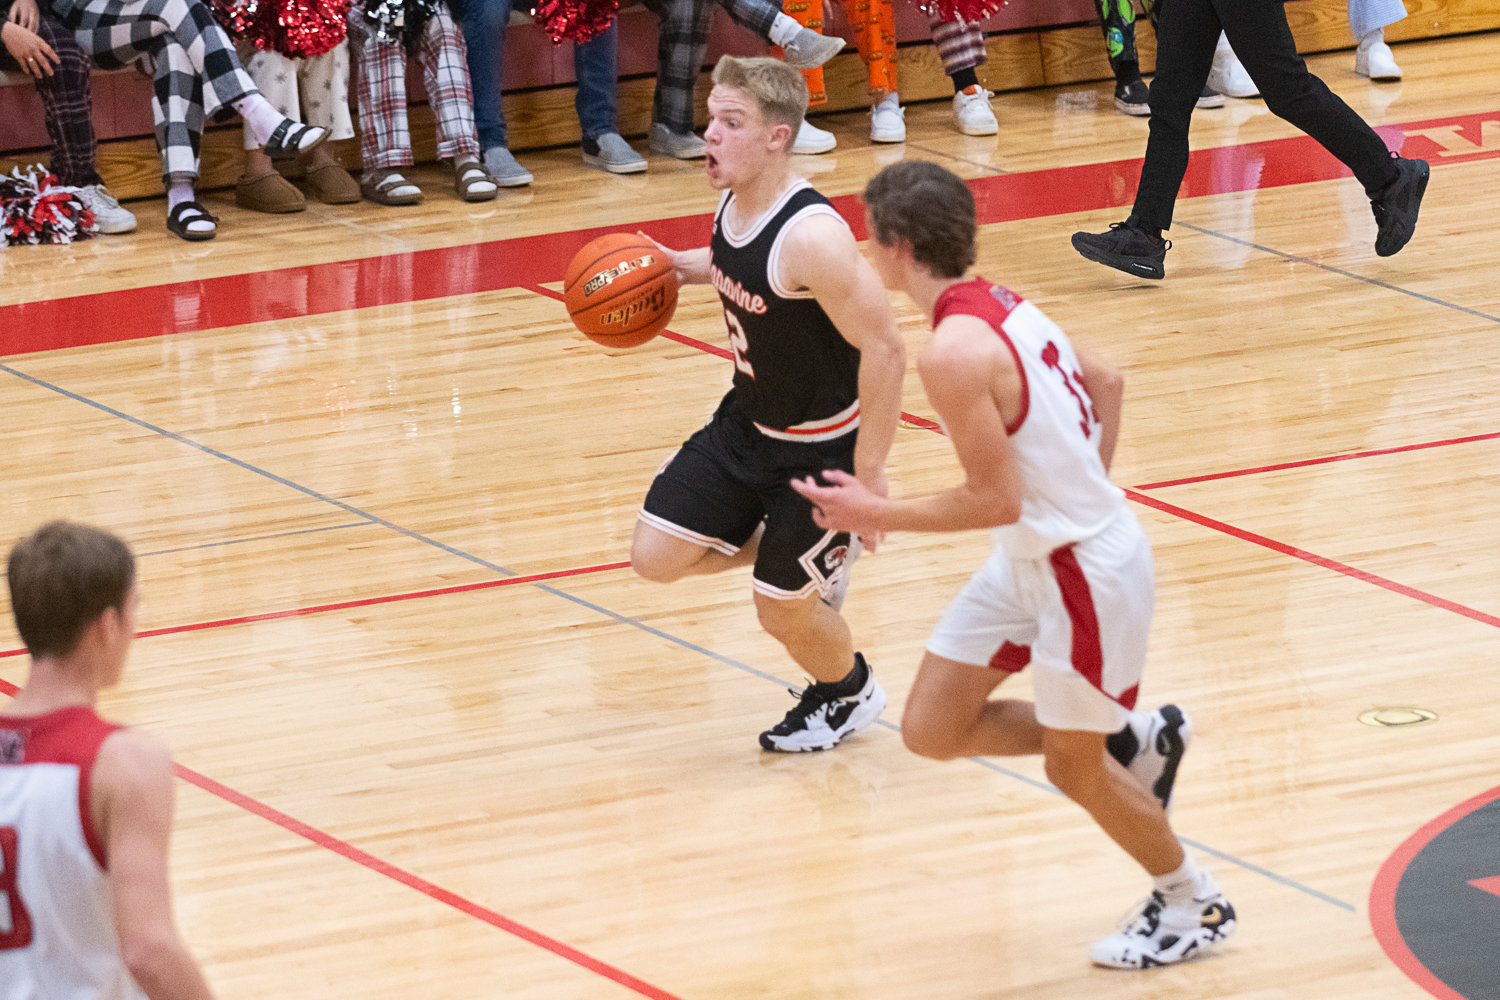 Cael Stanley dribbles up the court in during the second half of Napavine's 59-47 win over Toledo on Dec. 15.